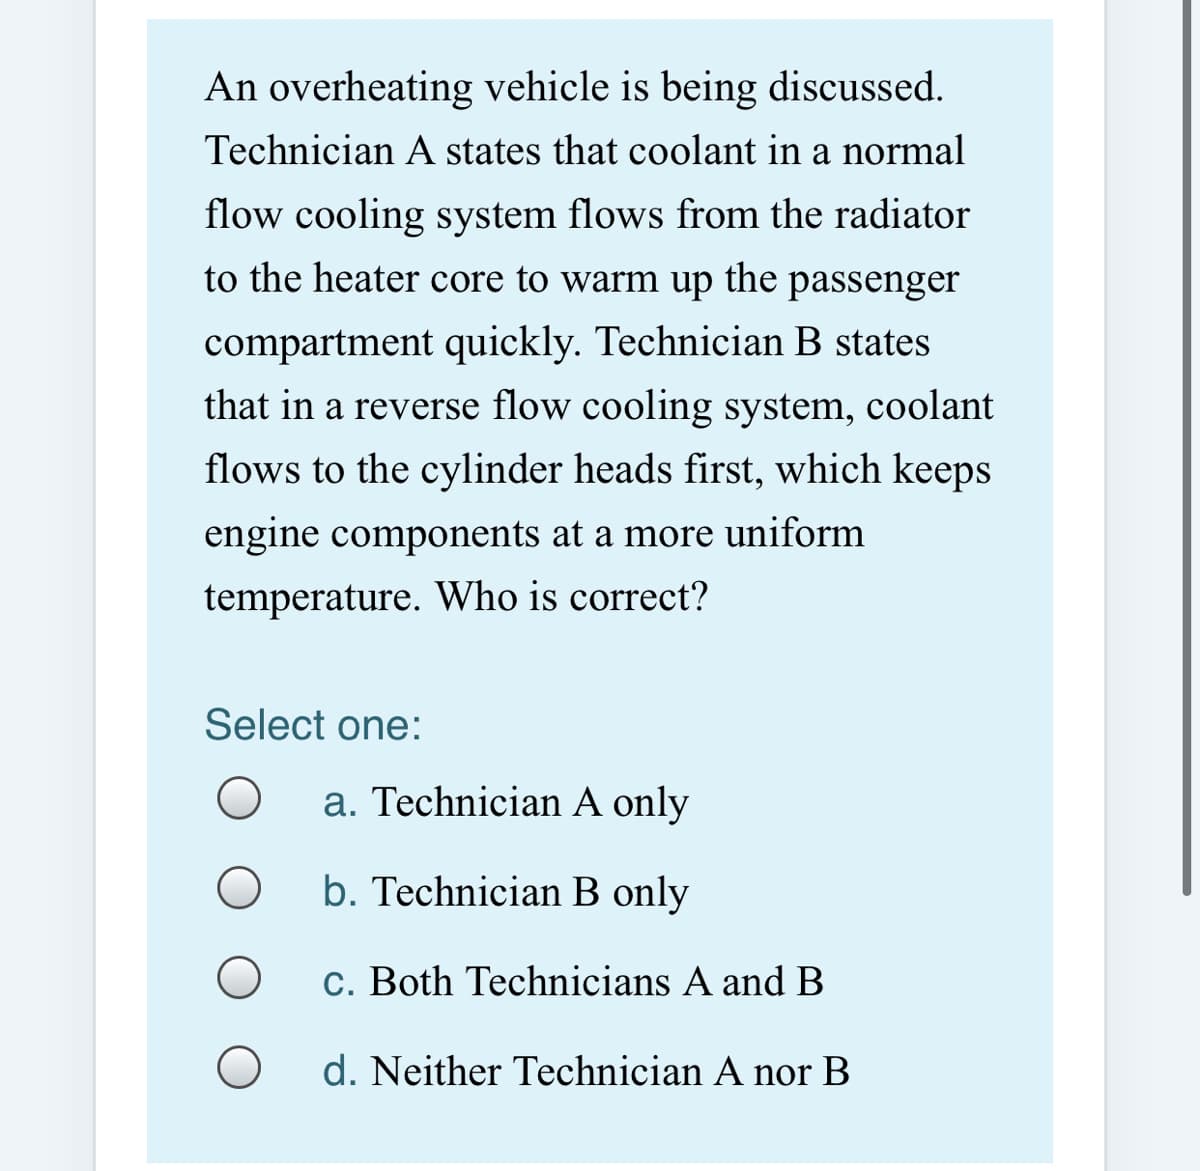 An overheating vehicle is being discussed.
Technician A states that coolant in a normal
flow cooling system flows from the radiator
to the heater core to warm up
the
passenger
compartment quickly. Technician B states
that in a reverse flow cooling system, coolant
flows to the cylinder heads first, which keeps
engine components at a more uniform
temperature. Who is correct?
Select one:
a. Technician A only
b. Technician B only
c. Both Technicians A andB
d. Neither Technician A nor B
